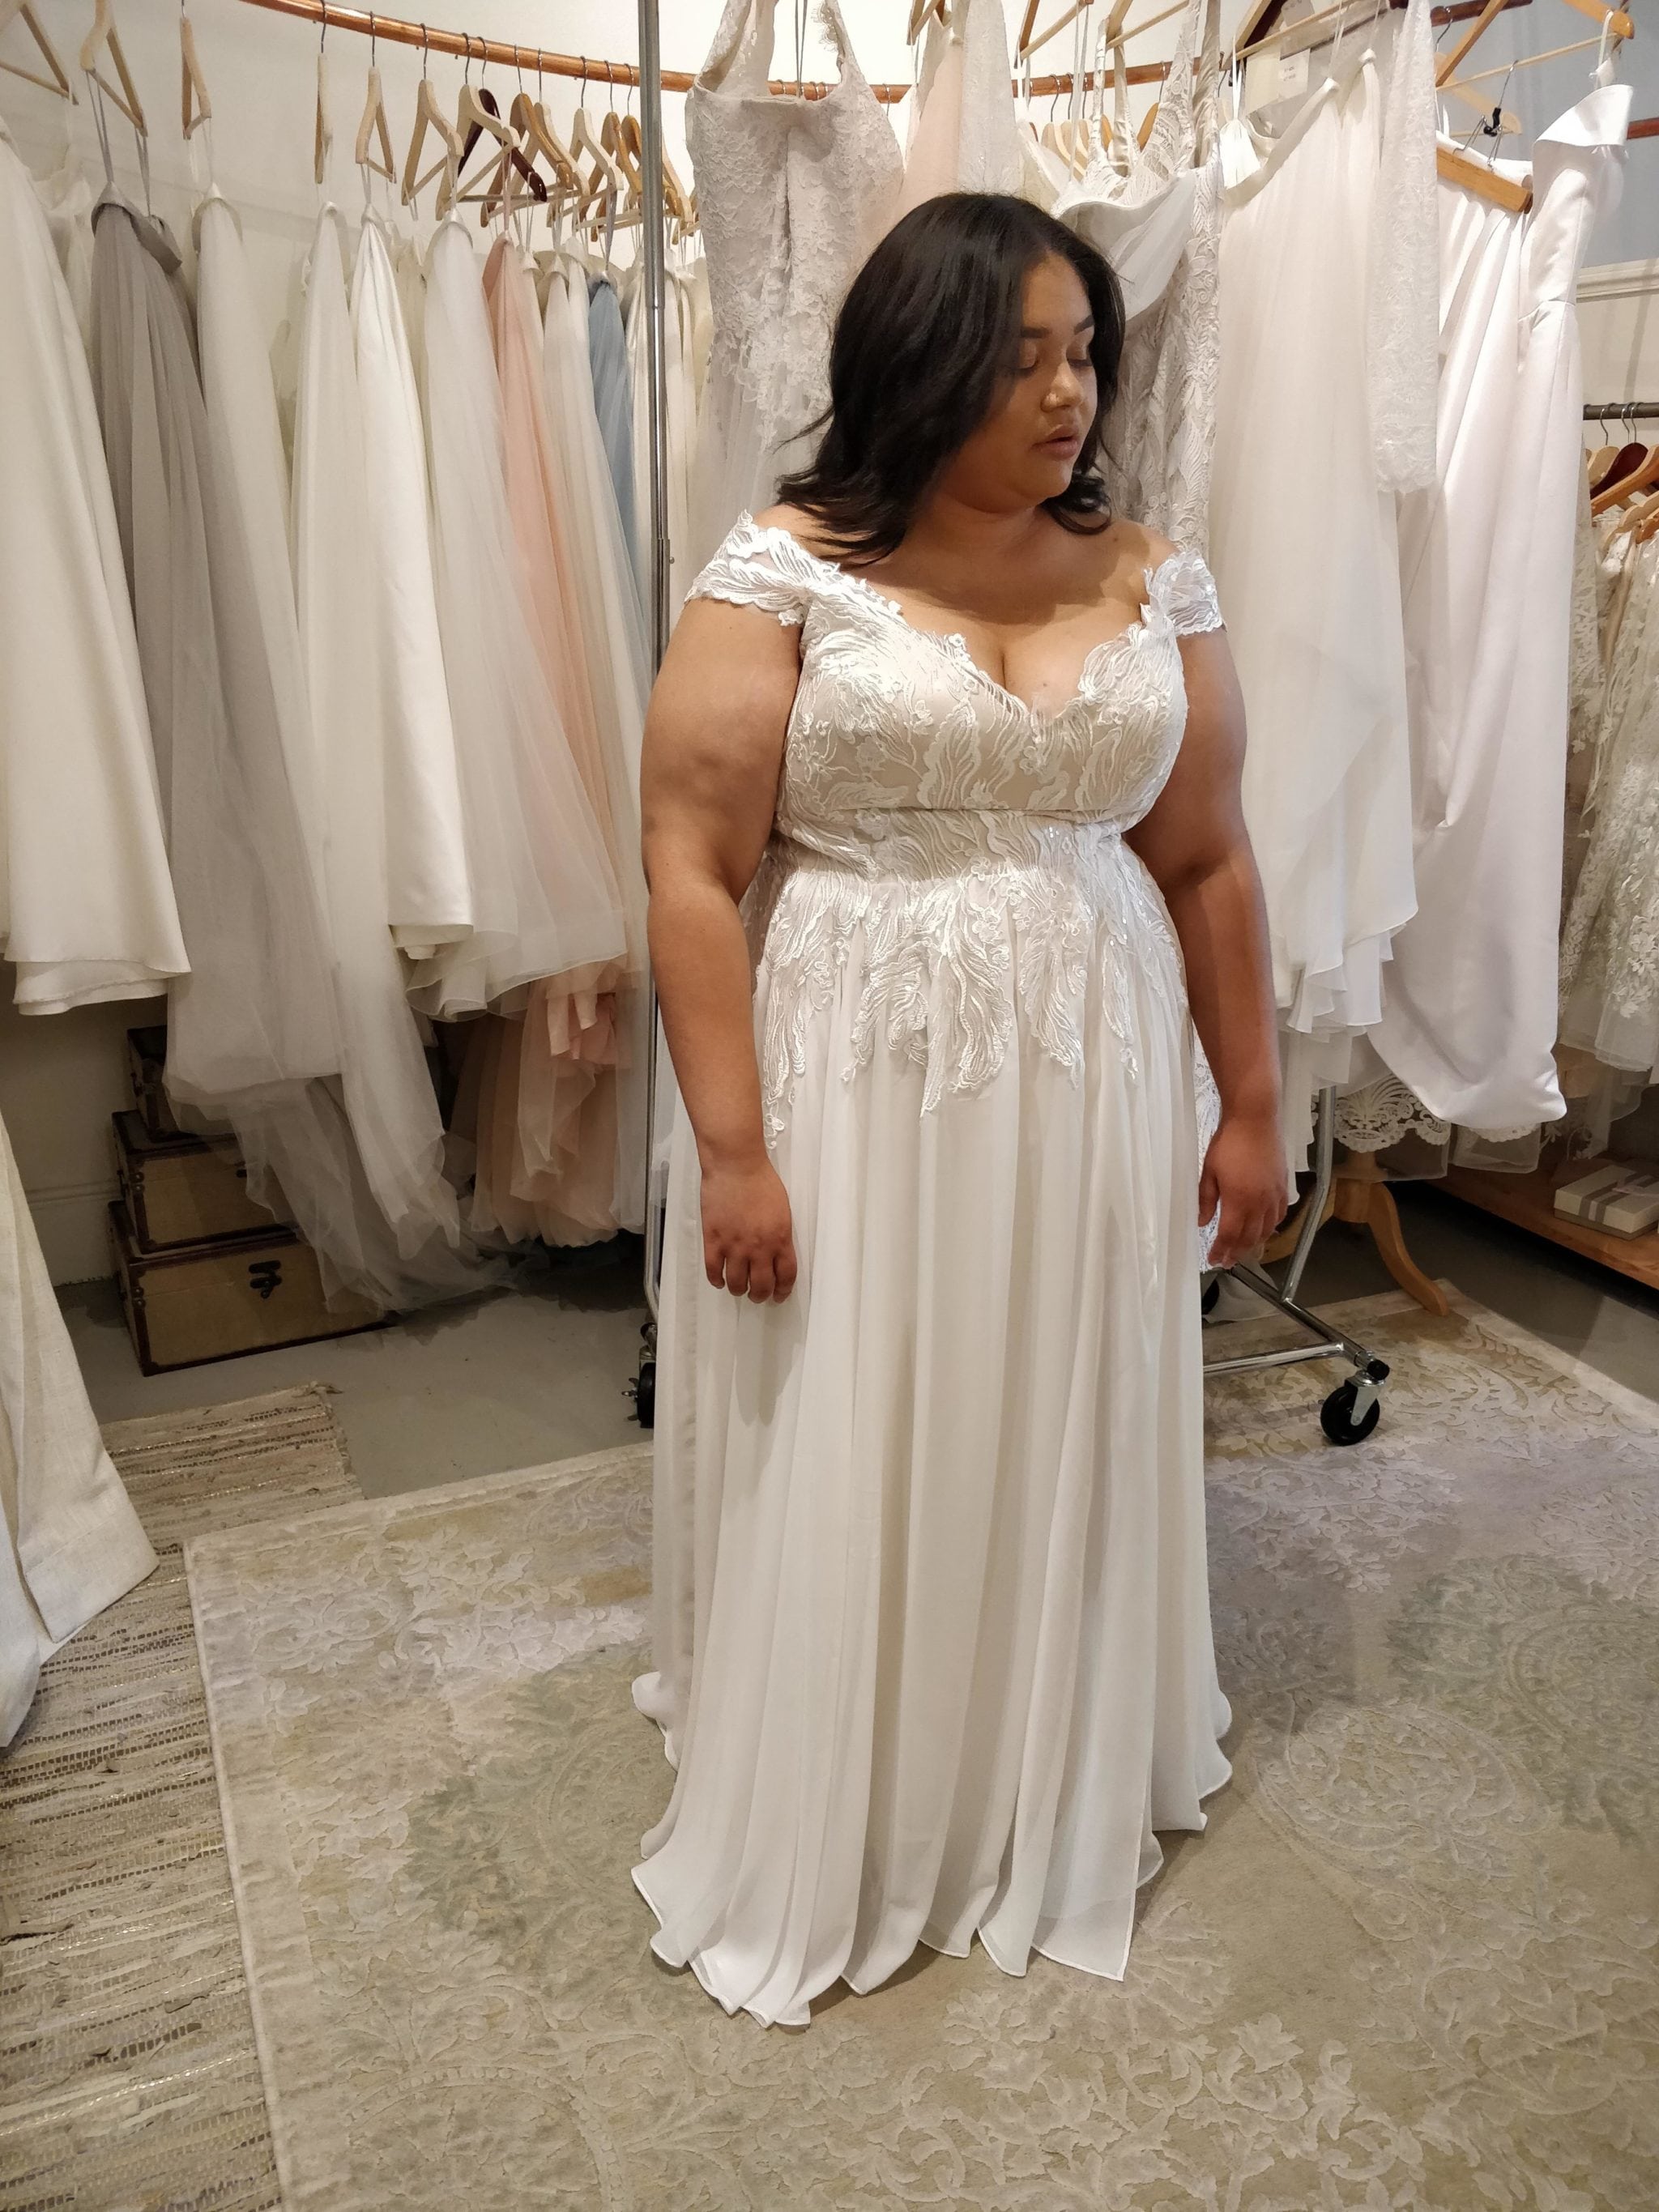 woman with straight dark hair wearing off the shoulder plus size lace wedding dress gown standing in front of other lace wedding dresses hanging from brown wooden hangers